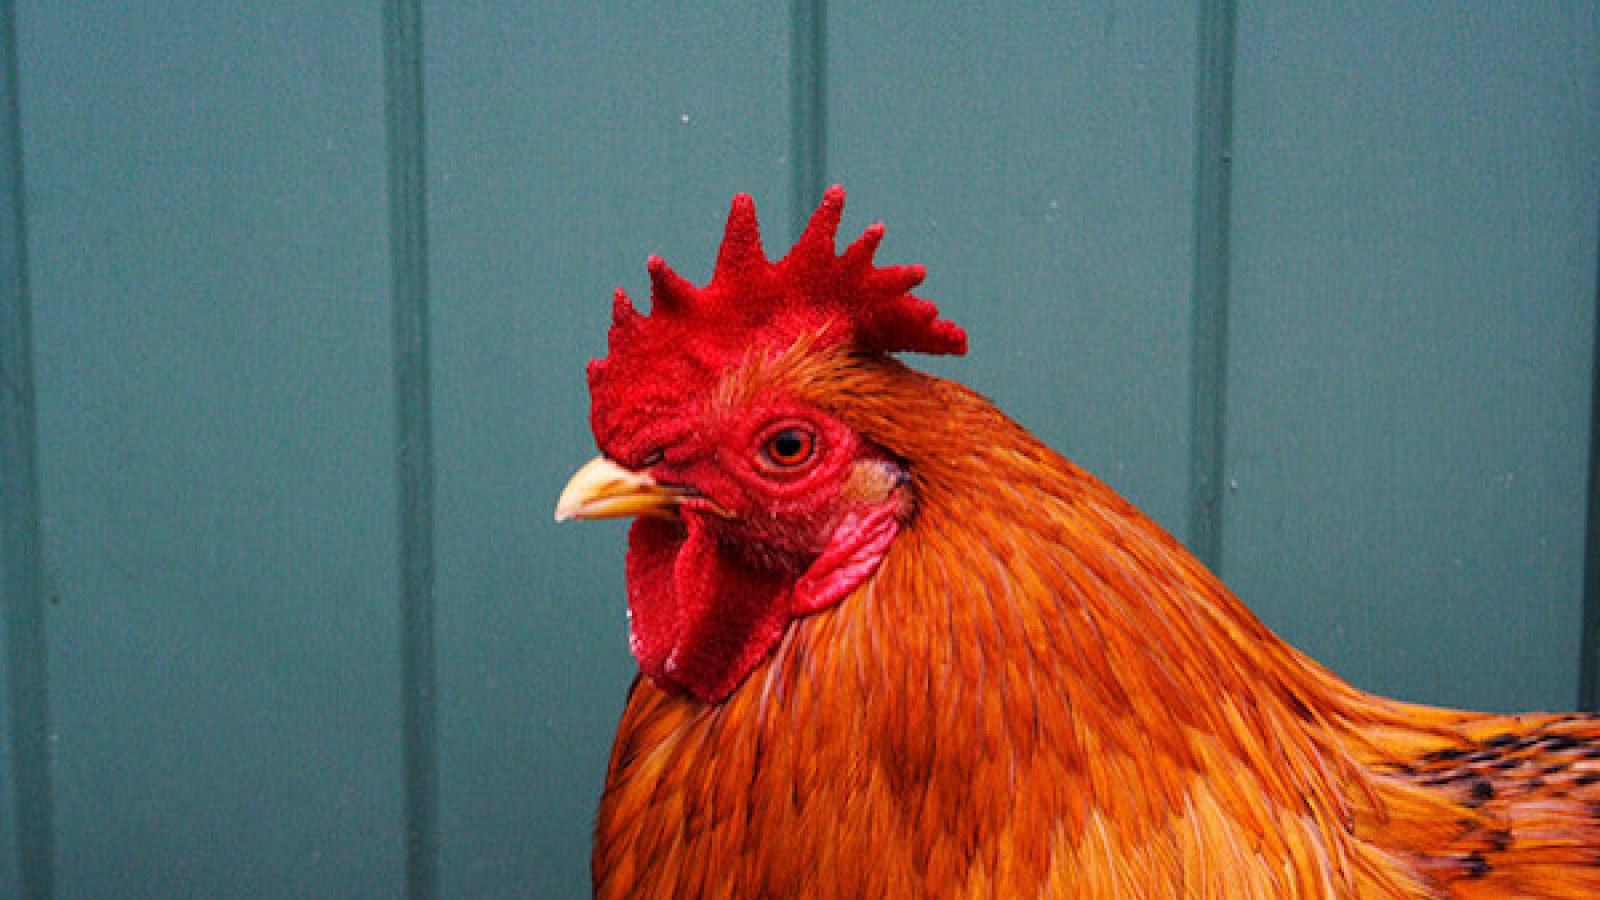 a close-up of a orange rooster against a blue-green outbuilding